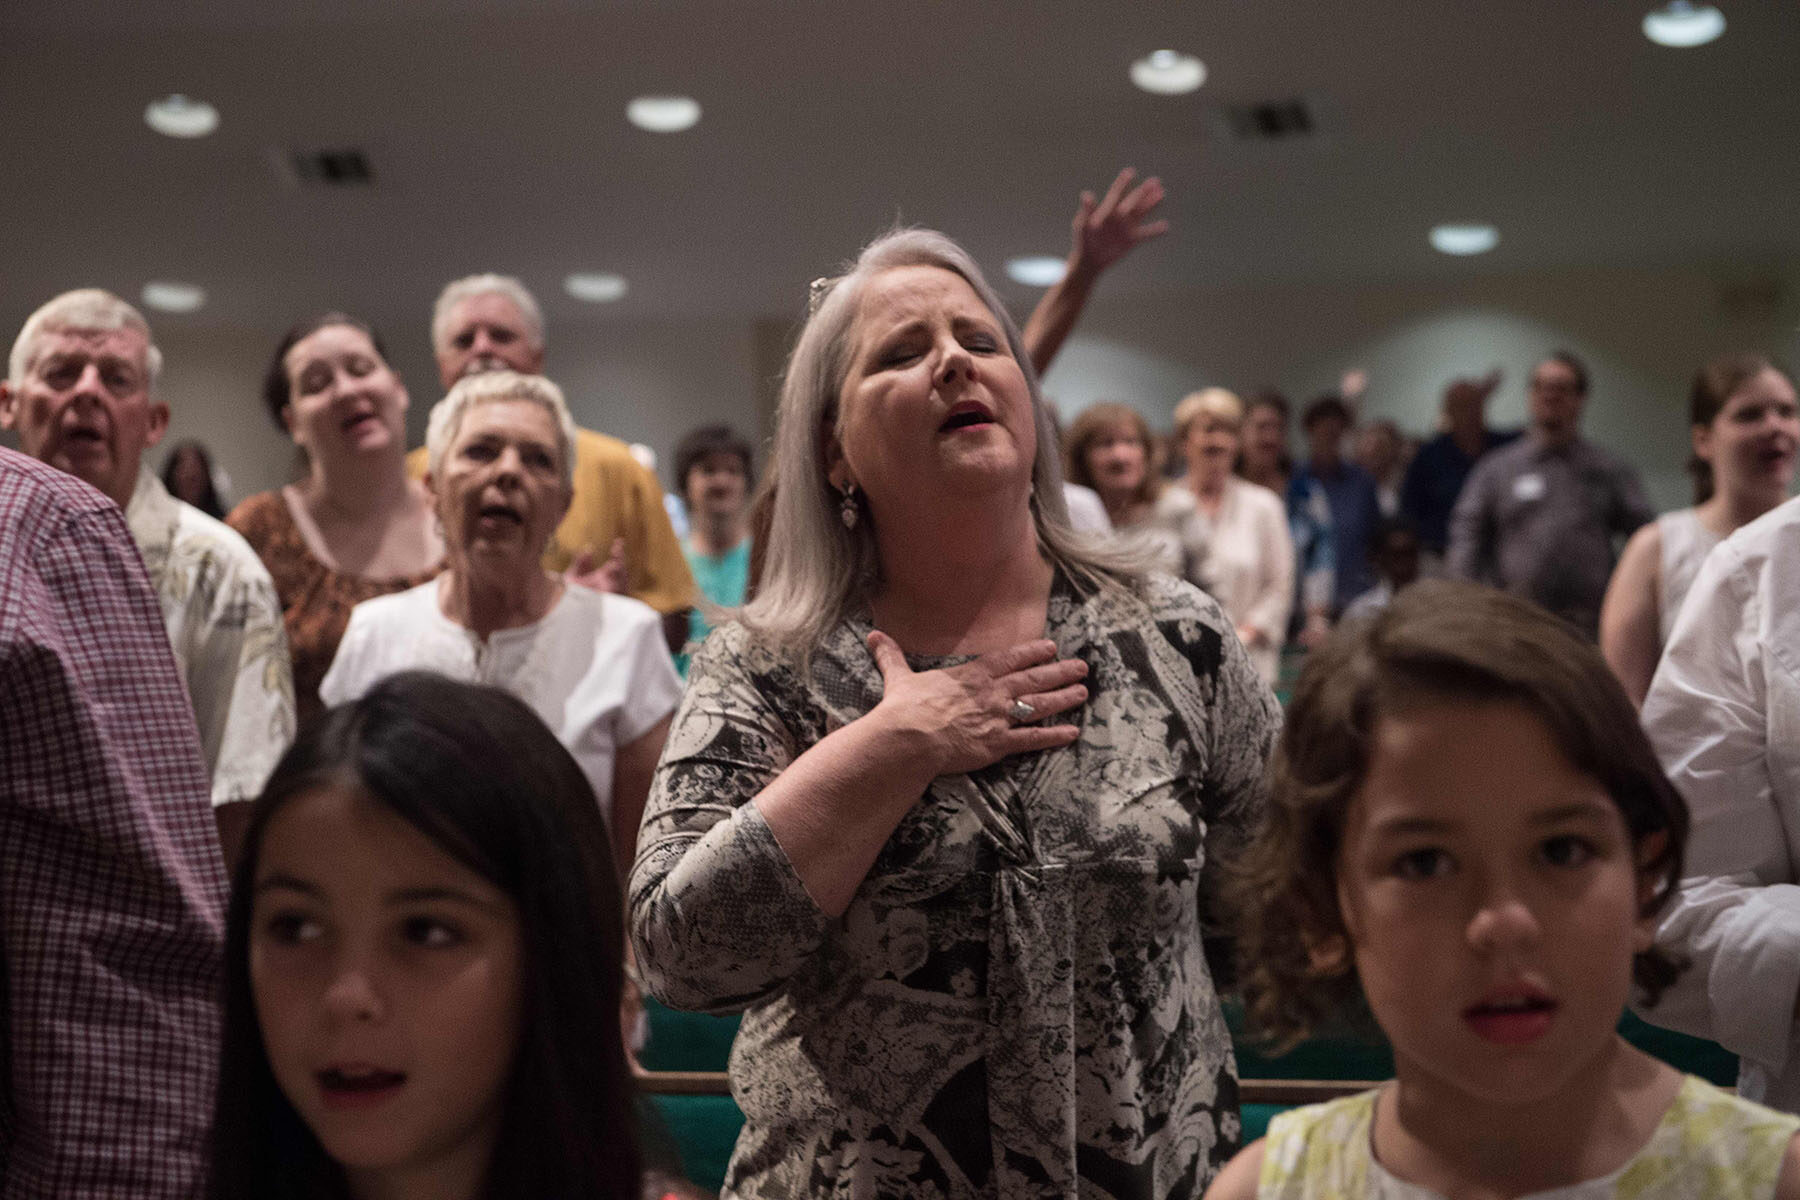 Christian evangelicals gesture and pray during a church service. Two young children are in the foreground of the image. One is looking at the camera, the other is looking away.